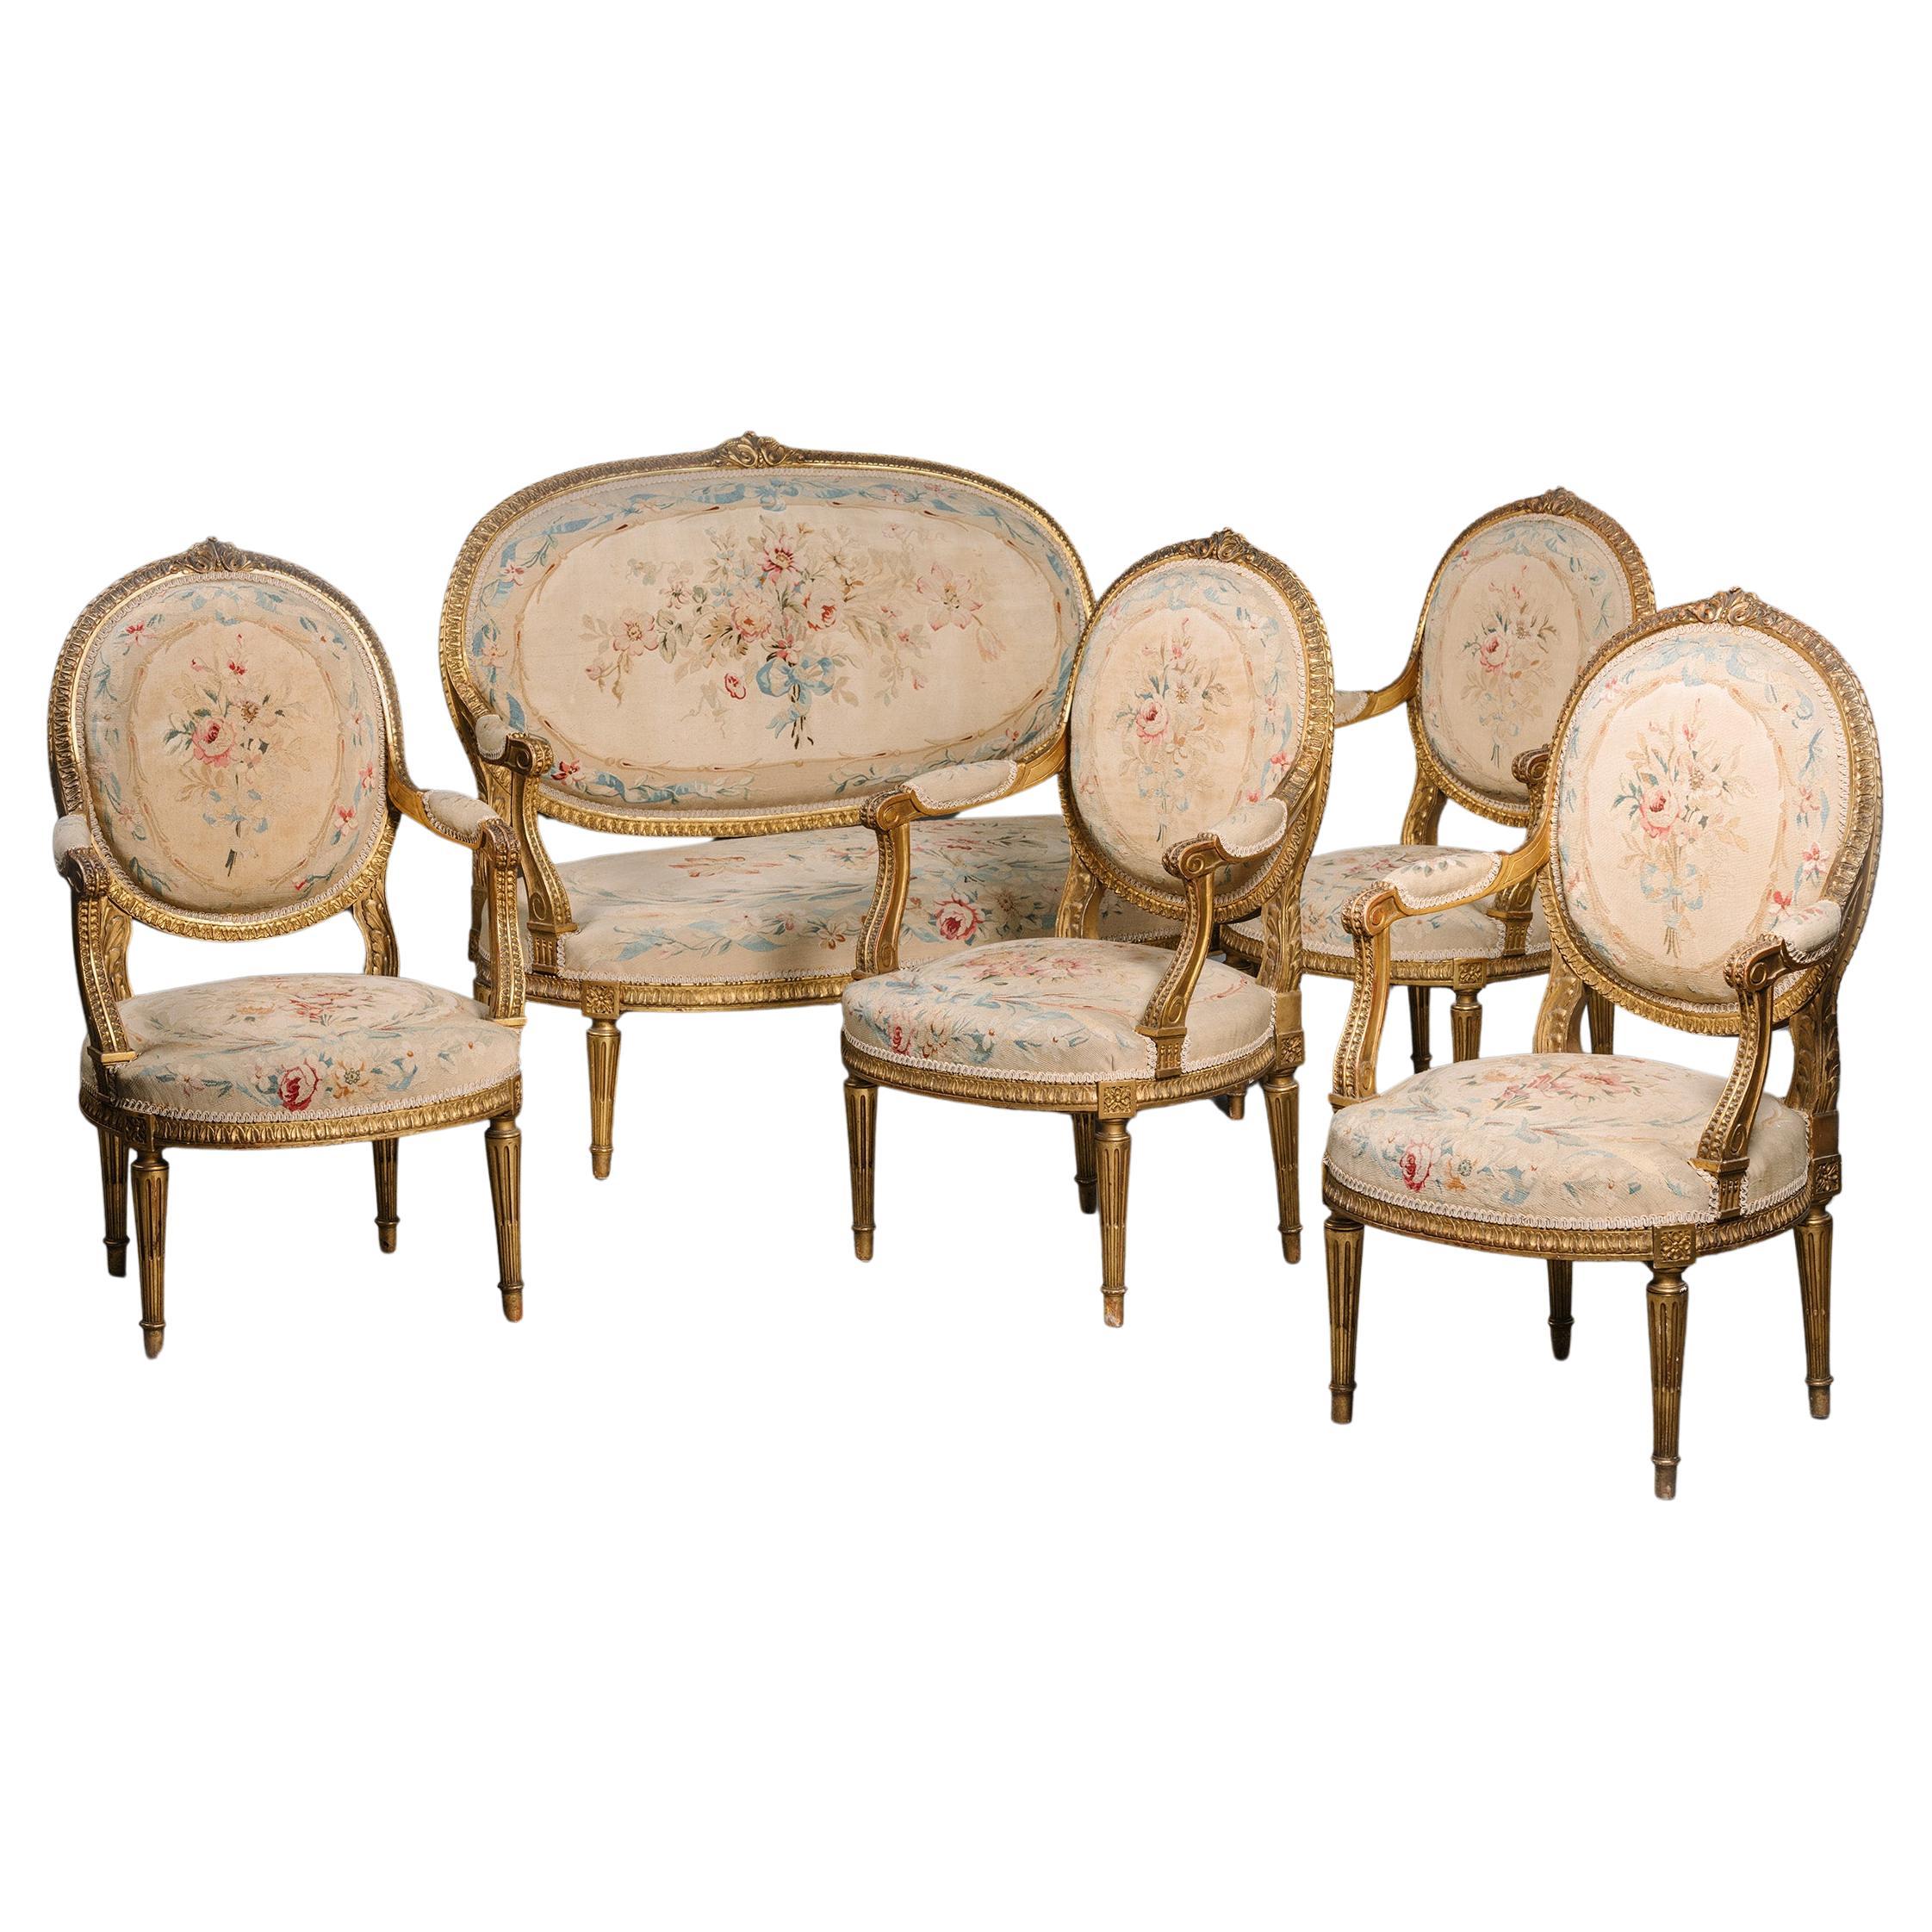 A Louis XVI Style Giltwood and Aubusson Tapestry Five-Piece Salon Suite For Sale